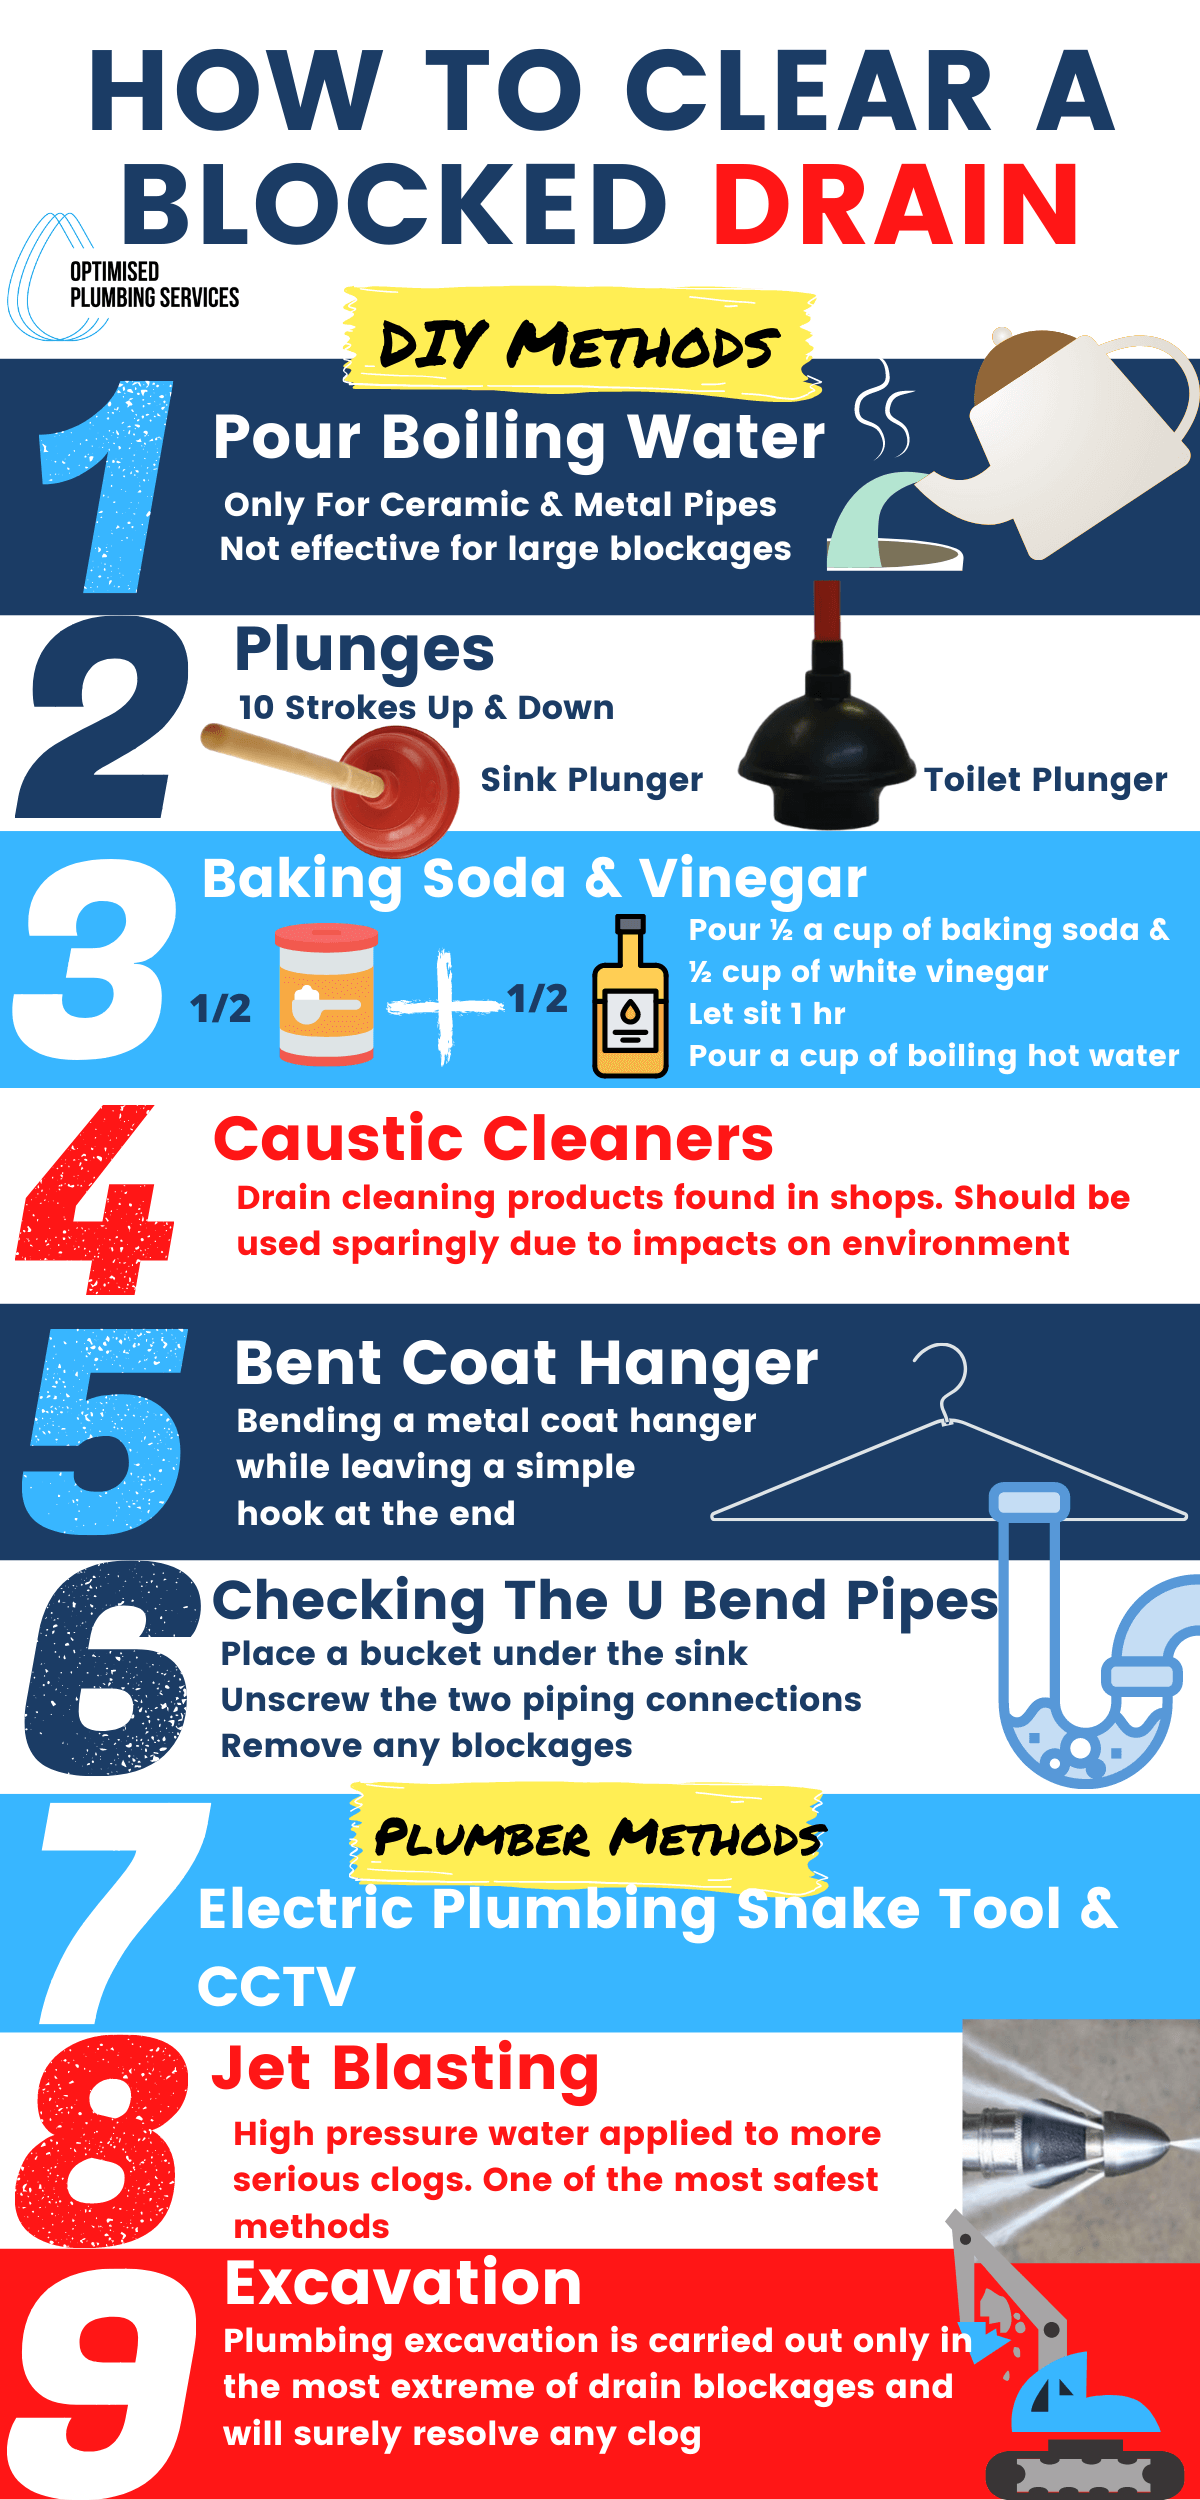 how-to-clear-blocked-drain-infographic-optimised-plumbing-services